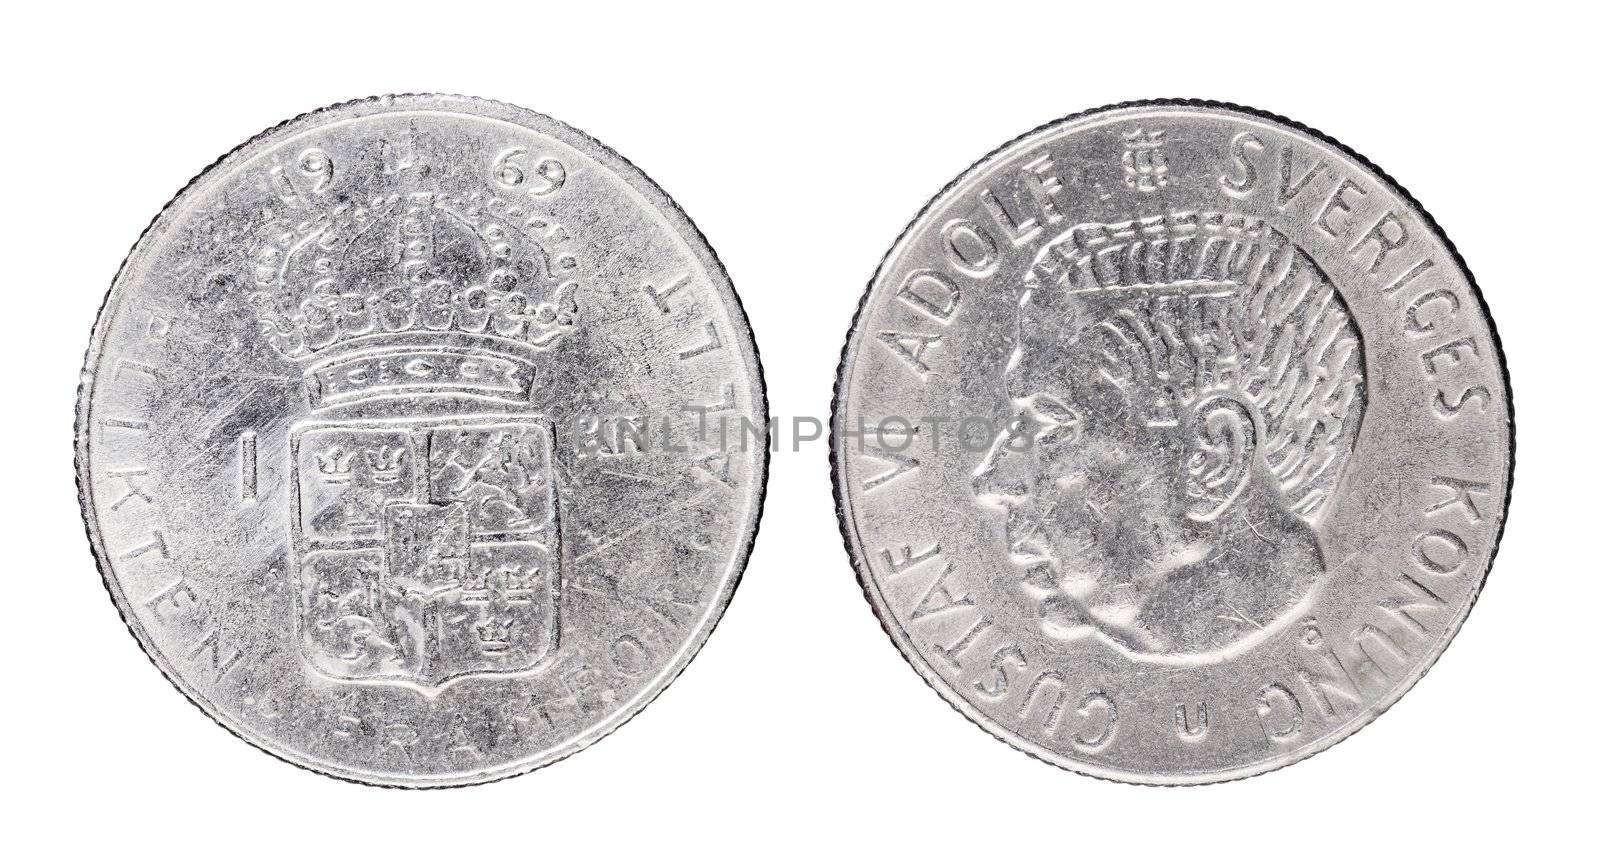 Swedish 1 Krona aka "Crown" coin from 1969 with King Gustaf VI Adolf of Sweden.